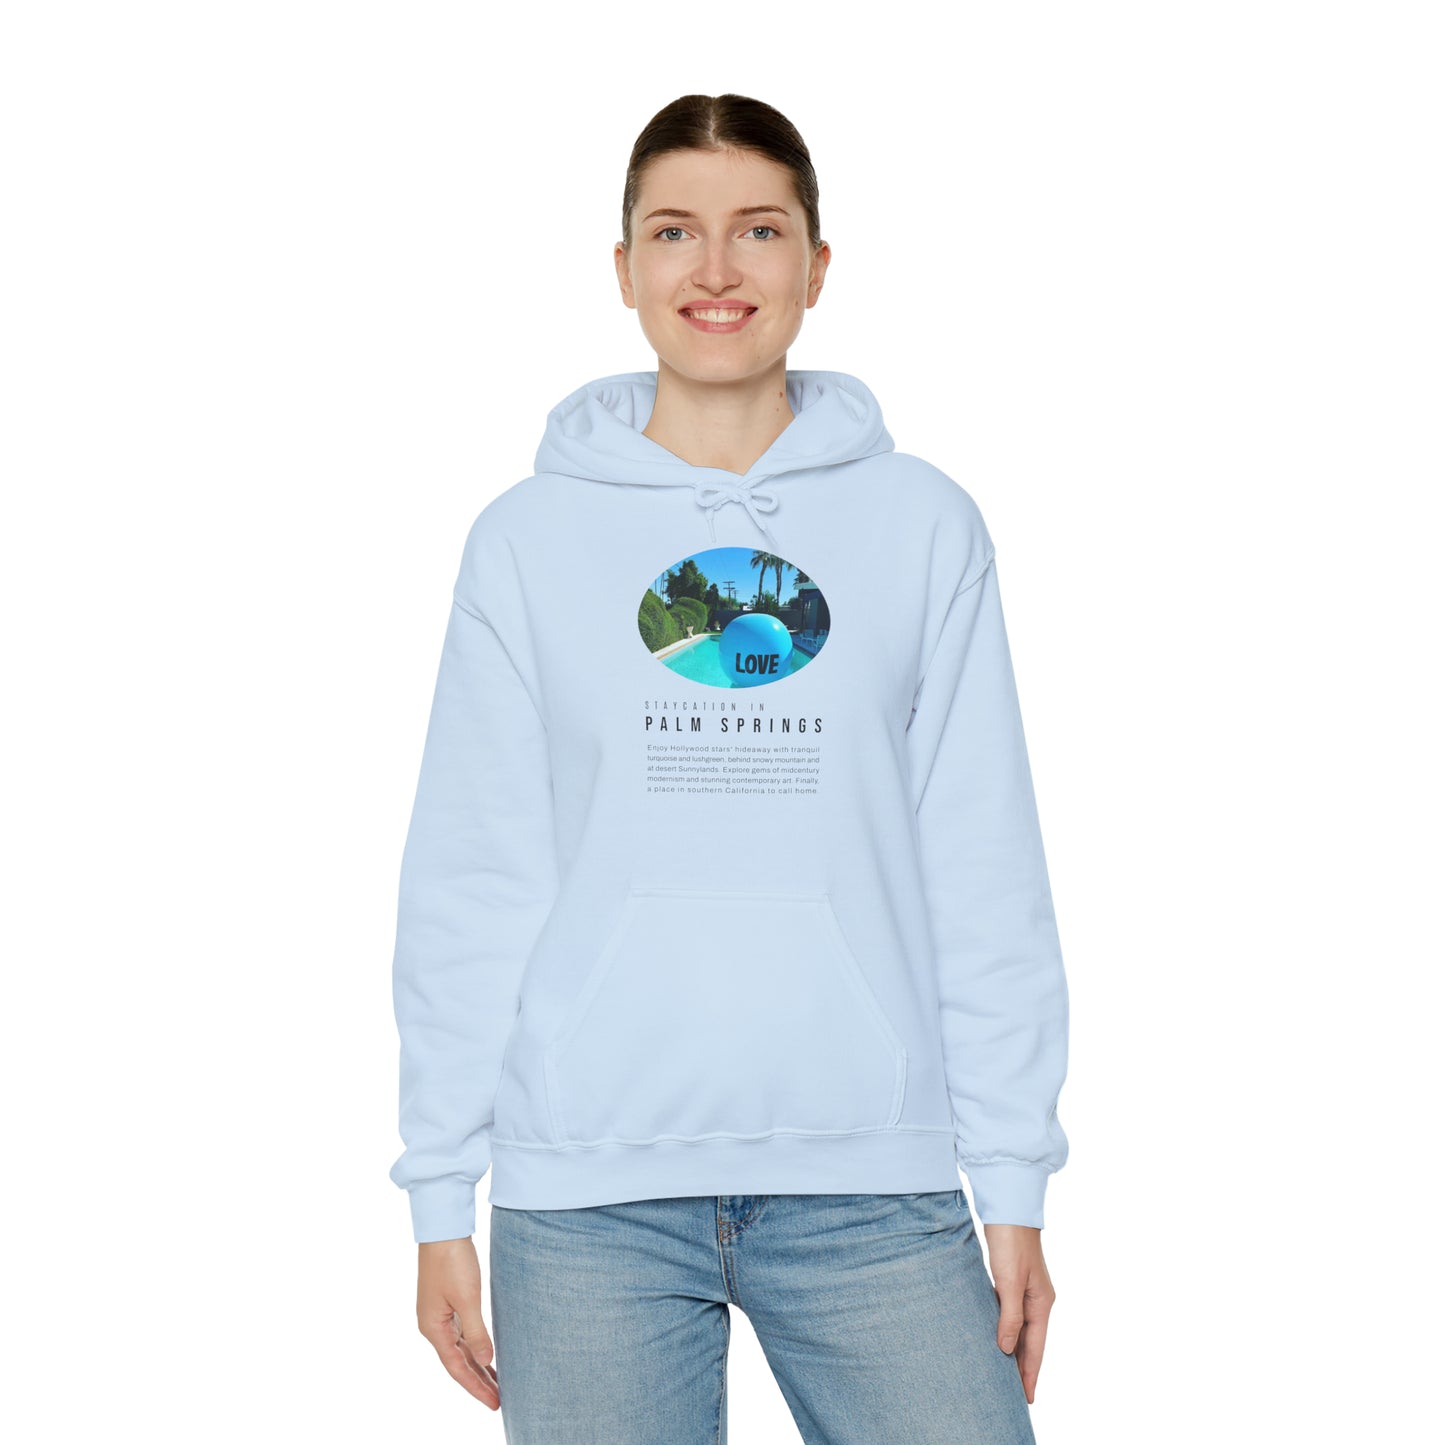 Staycation in Palm Springs Premium Unisex  Lifestyle Hoodie by ViralDestinations